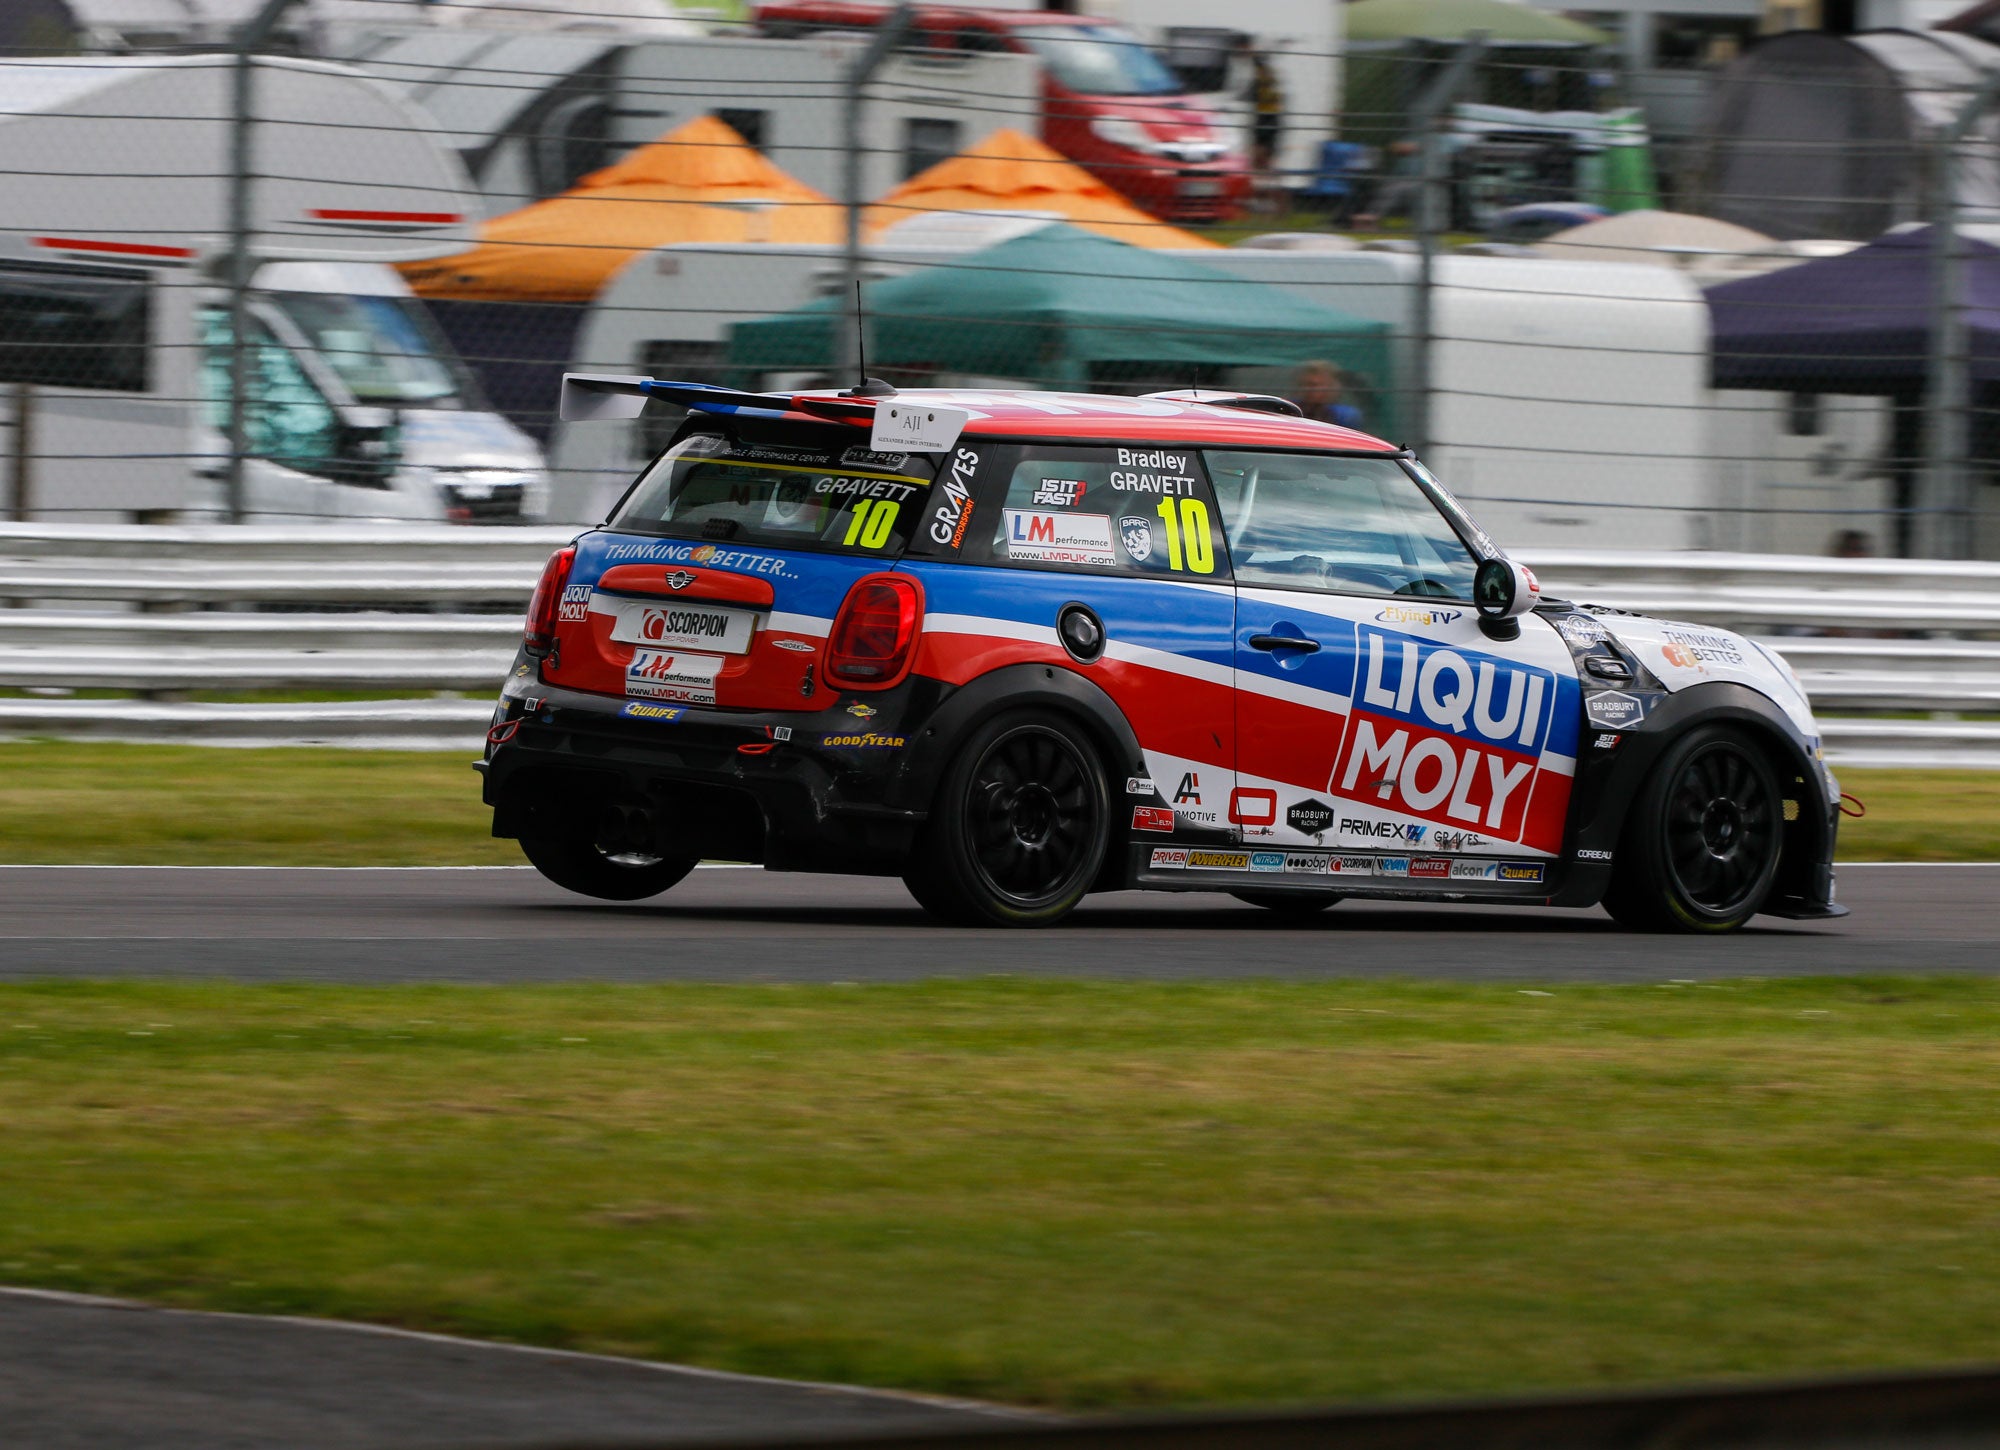 Bradley Gravett son of BTCC British Touring Car Champion Robb Gravett in the MINI Challenge JCW Series at Oulton Park in 2022 Entry to Cascades Graves Motorsport Cooper Racing Driver LIQUI MOLY LM Performance Thinking it Better